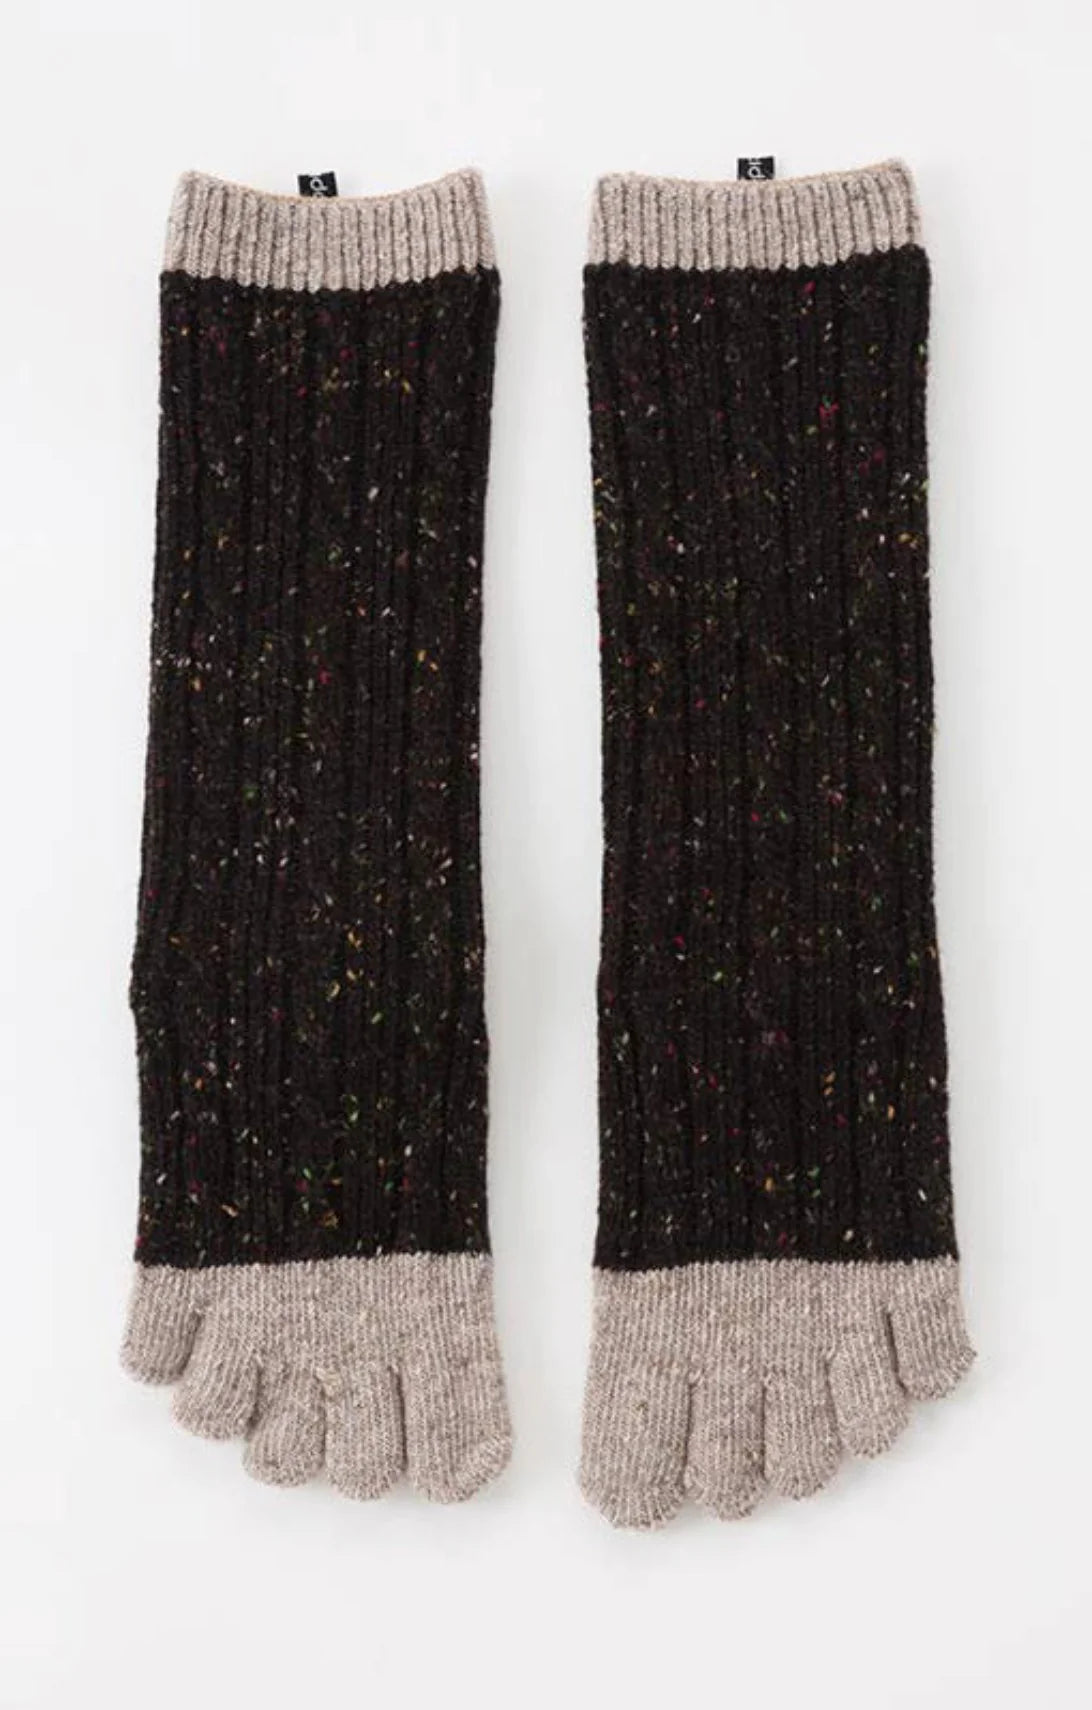 Knitido plus's Wool Blend Cable Confetti Midcalf Socks in Black